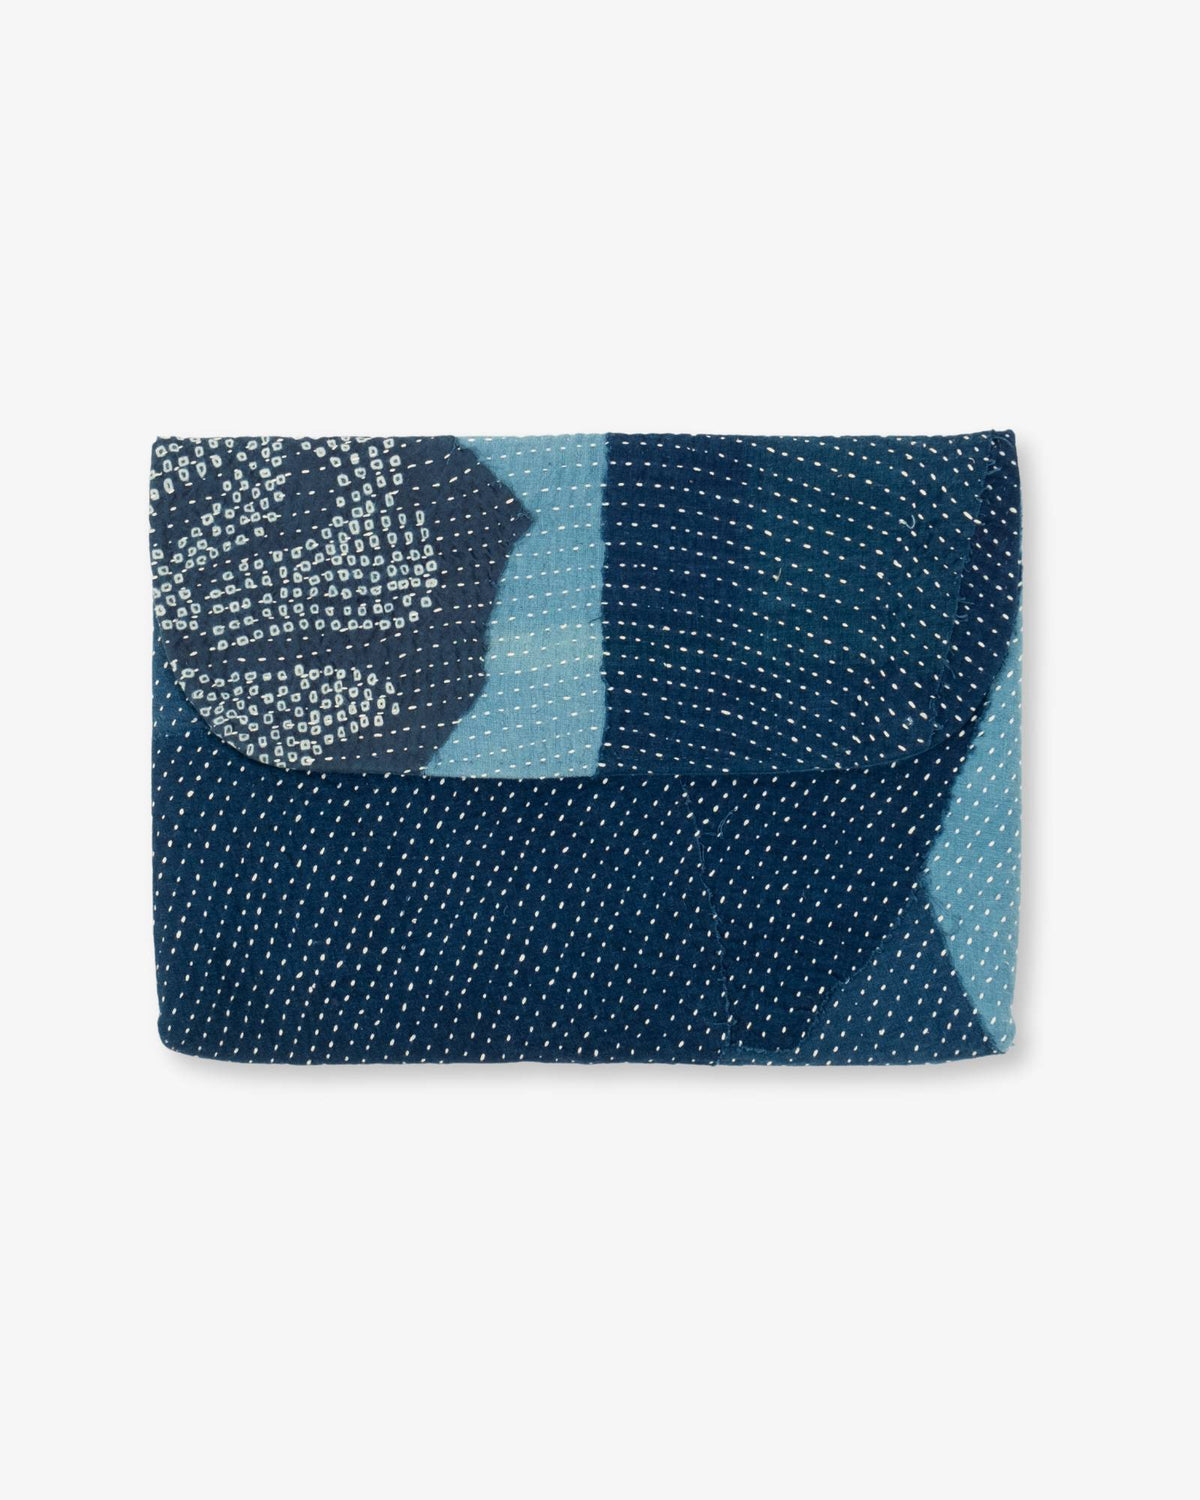 Kantha Laptop Sleeve by 11.11